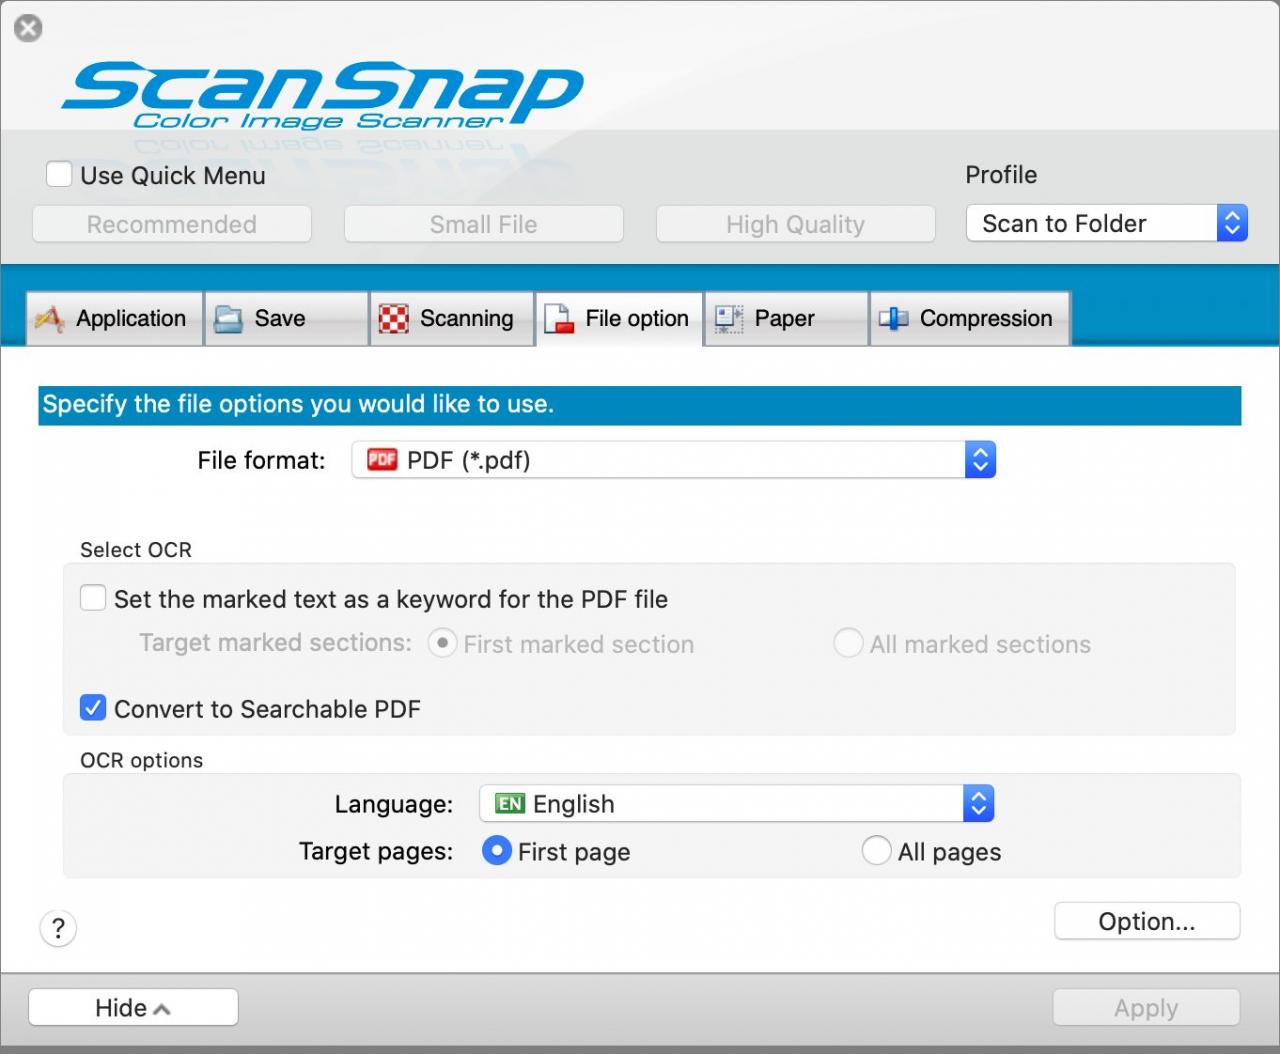 An old version of scansnap manager is installed